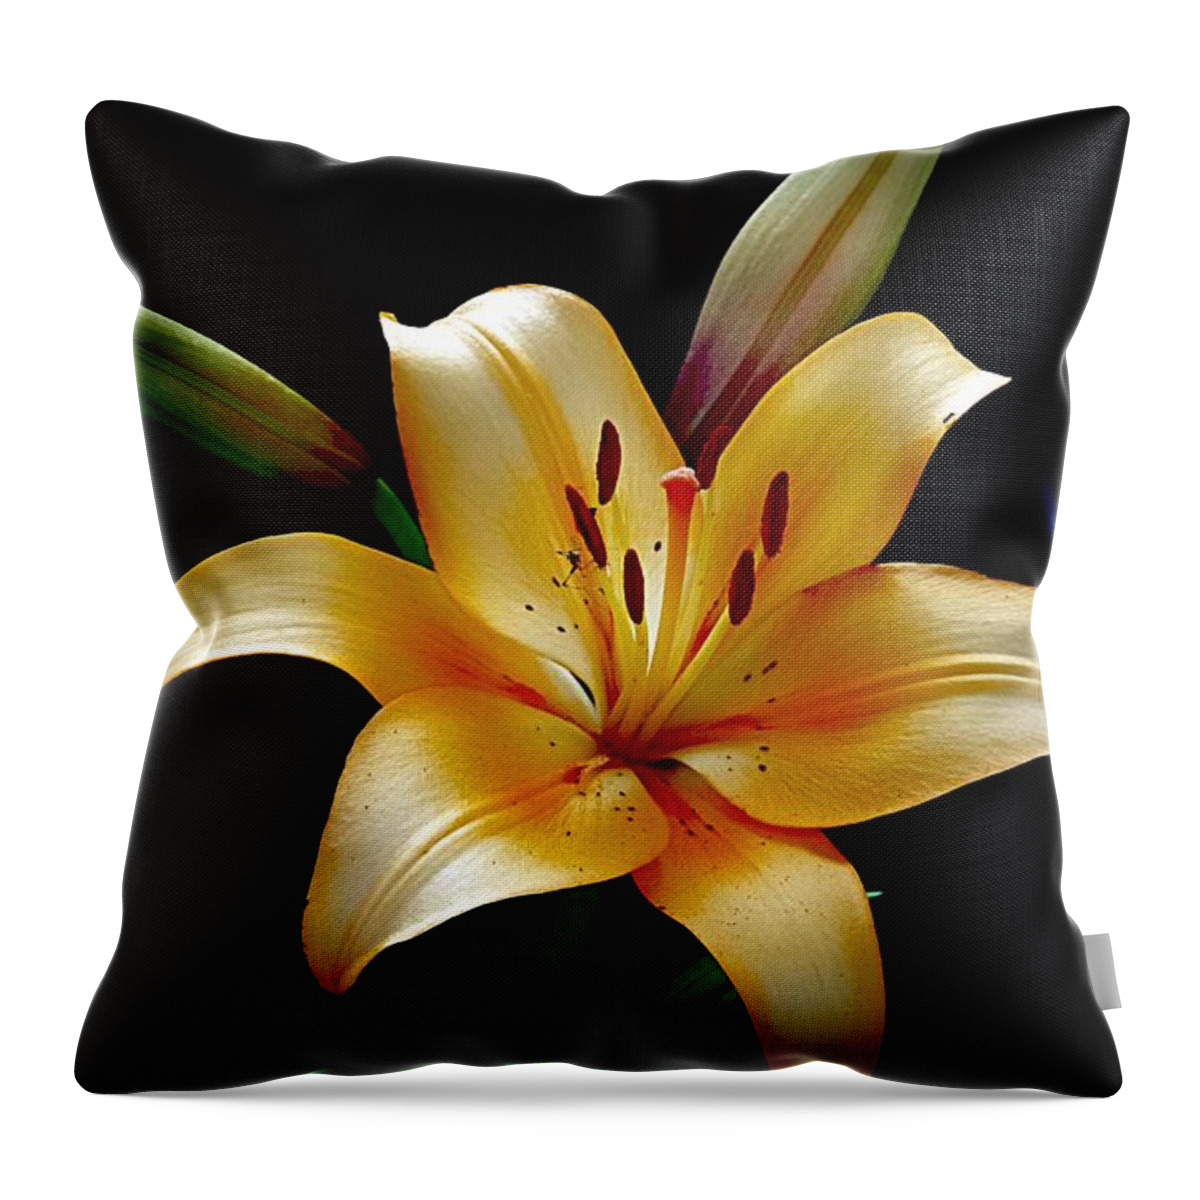 Orange Lily Throw Pillow featuring the photograph The Queen Lily by Karen McKenzie McAdoo